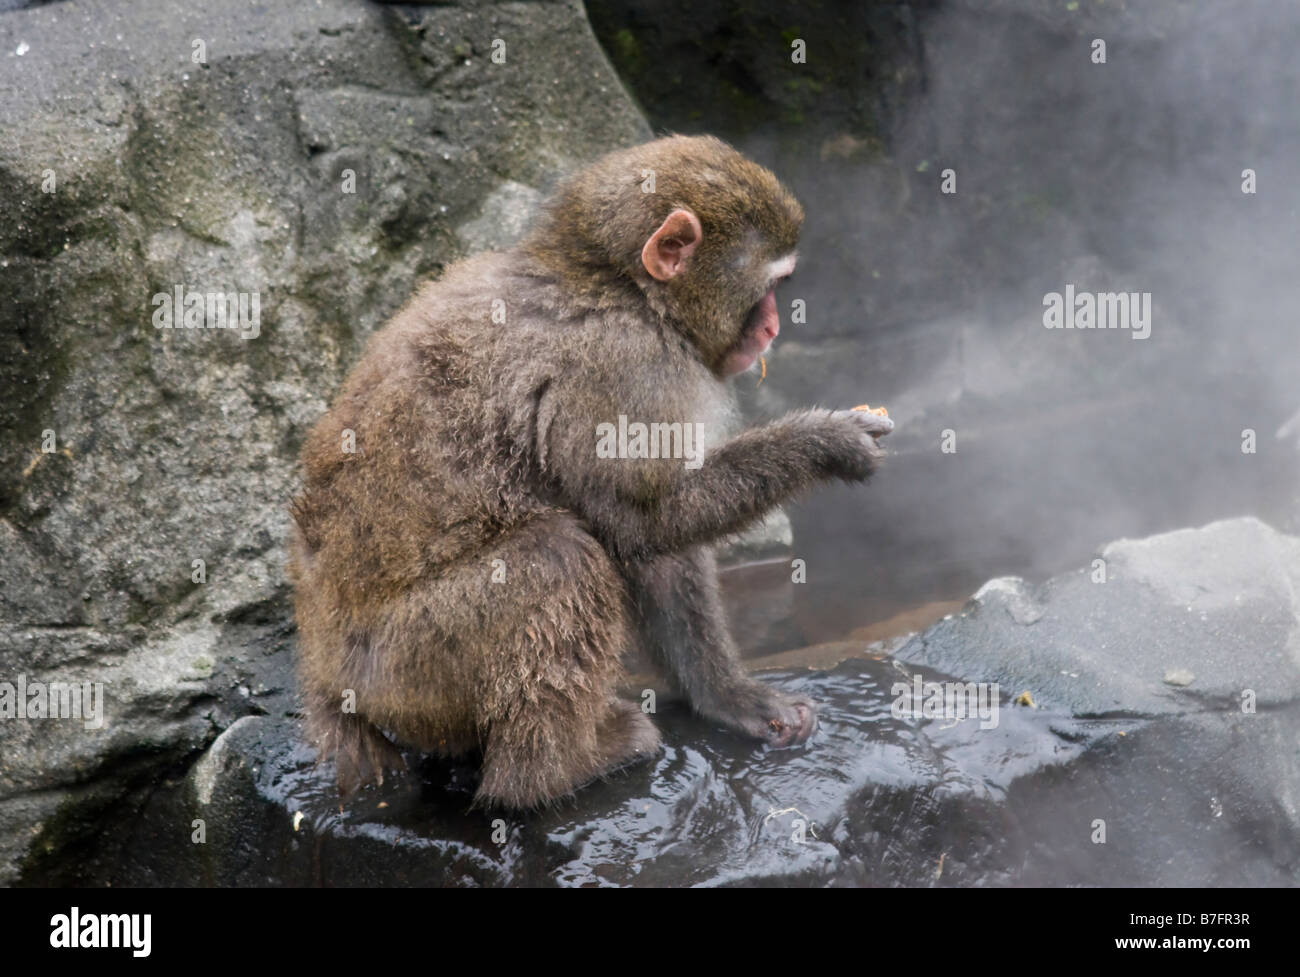 A snow monkey are seen in its enclosure at Central Park Zoo in New York Stock Photo